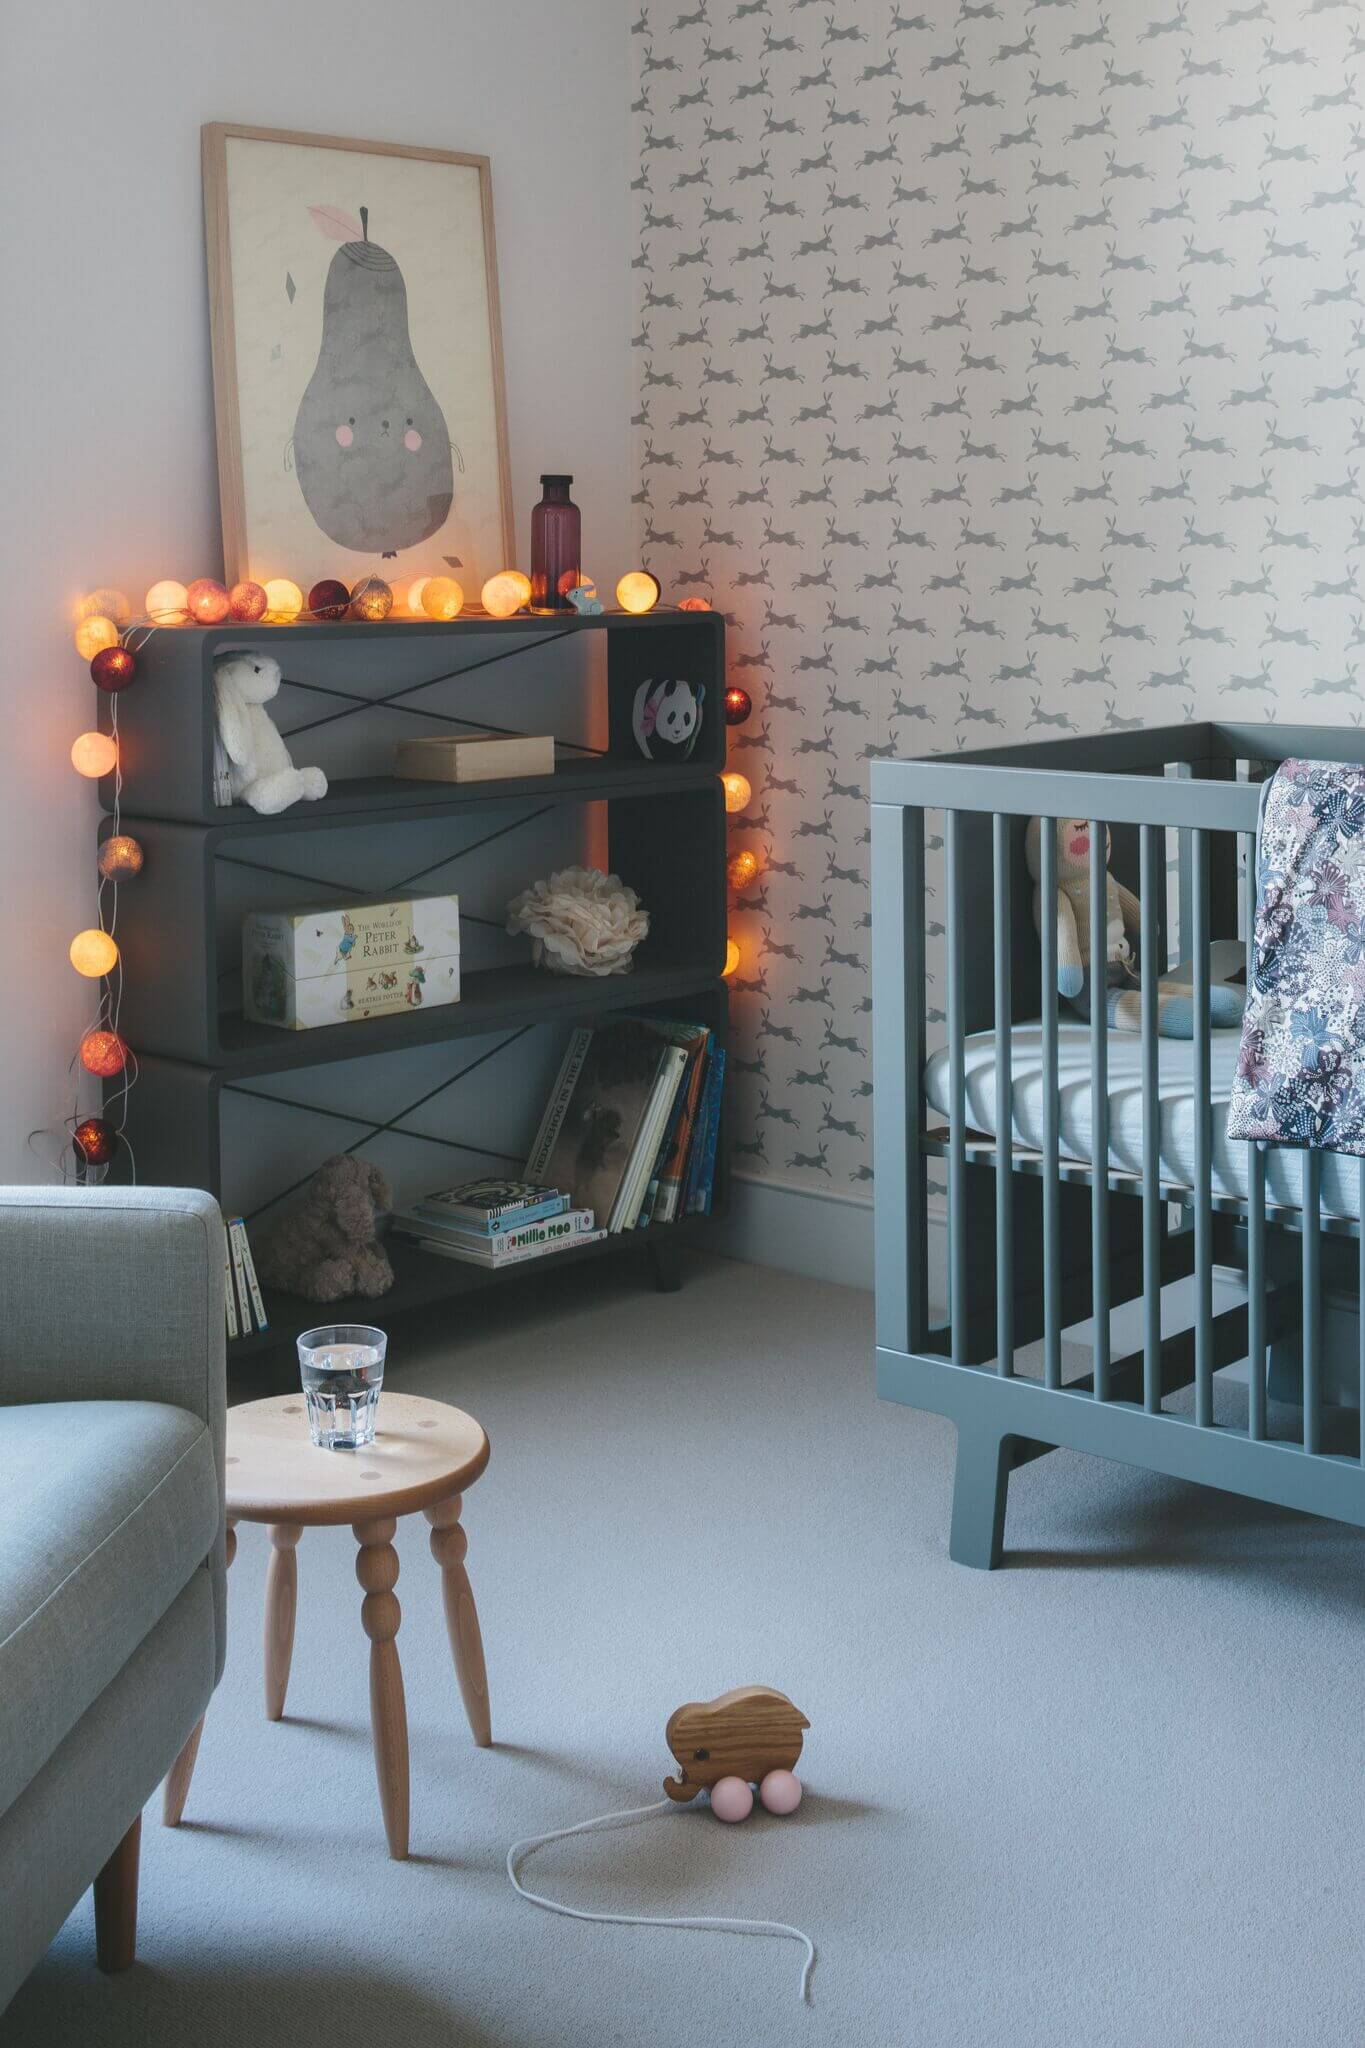 Choosing colour for kids' rooms